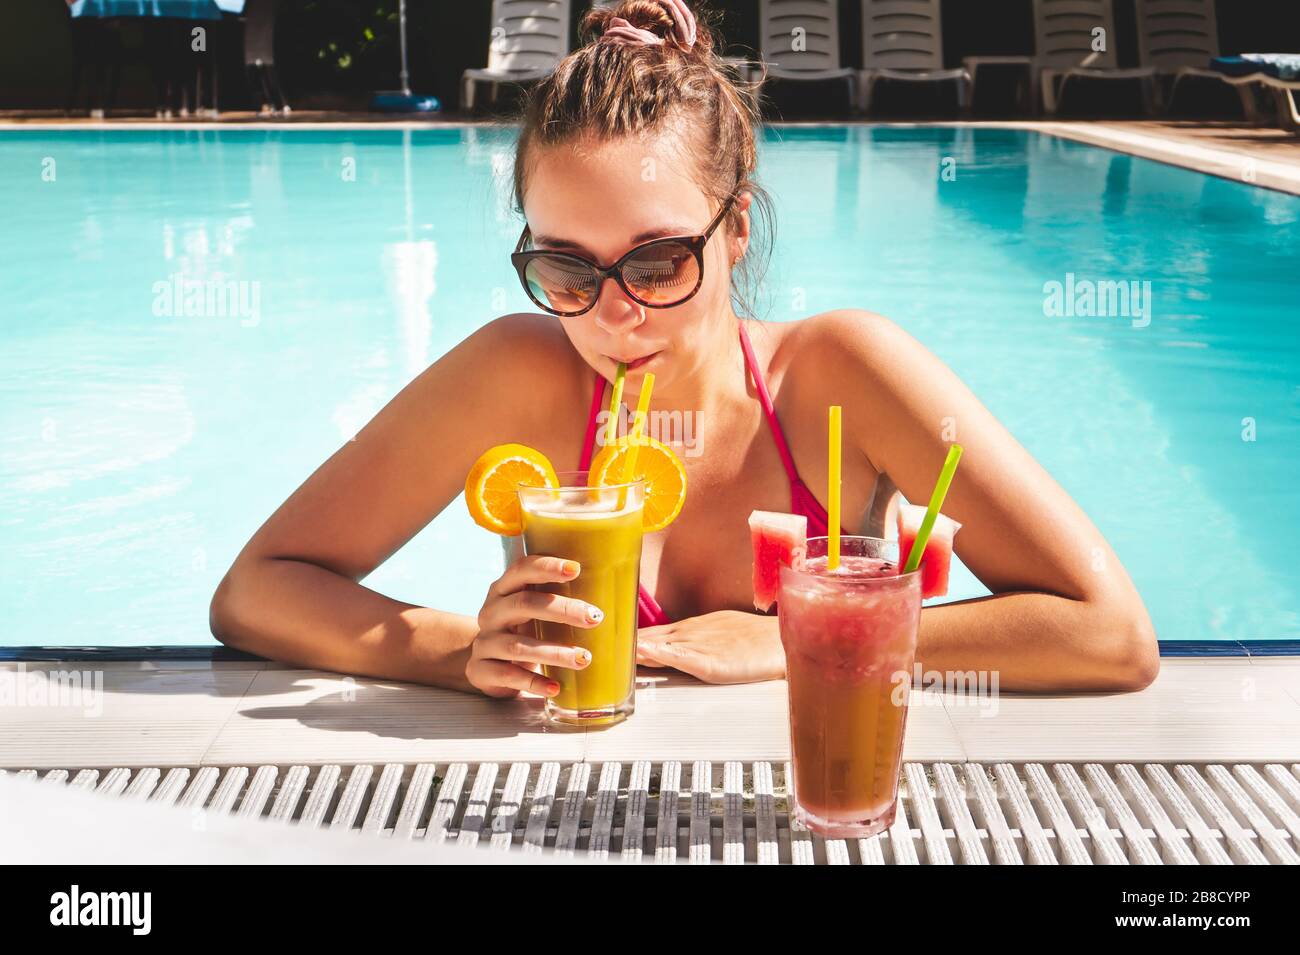 Woman drinking cocktail on the edge of swimming pool in an all inclusive hotel resort or luxury holiday villa. Tan lady in bikini in the poolside. Stock Photo